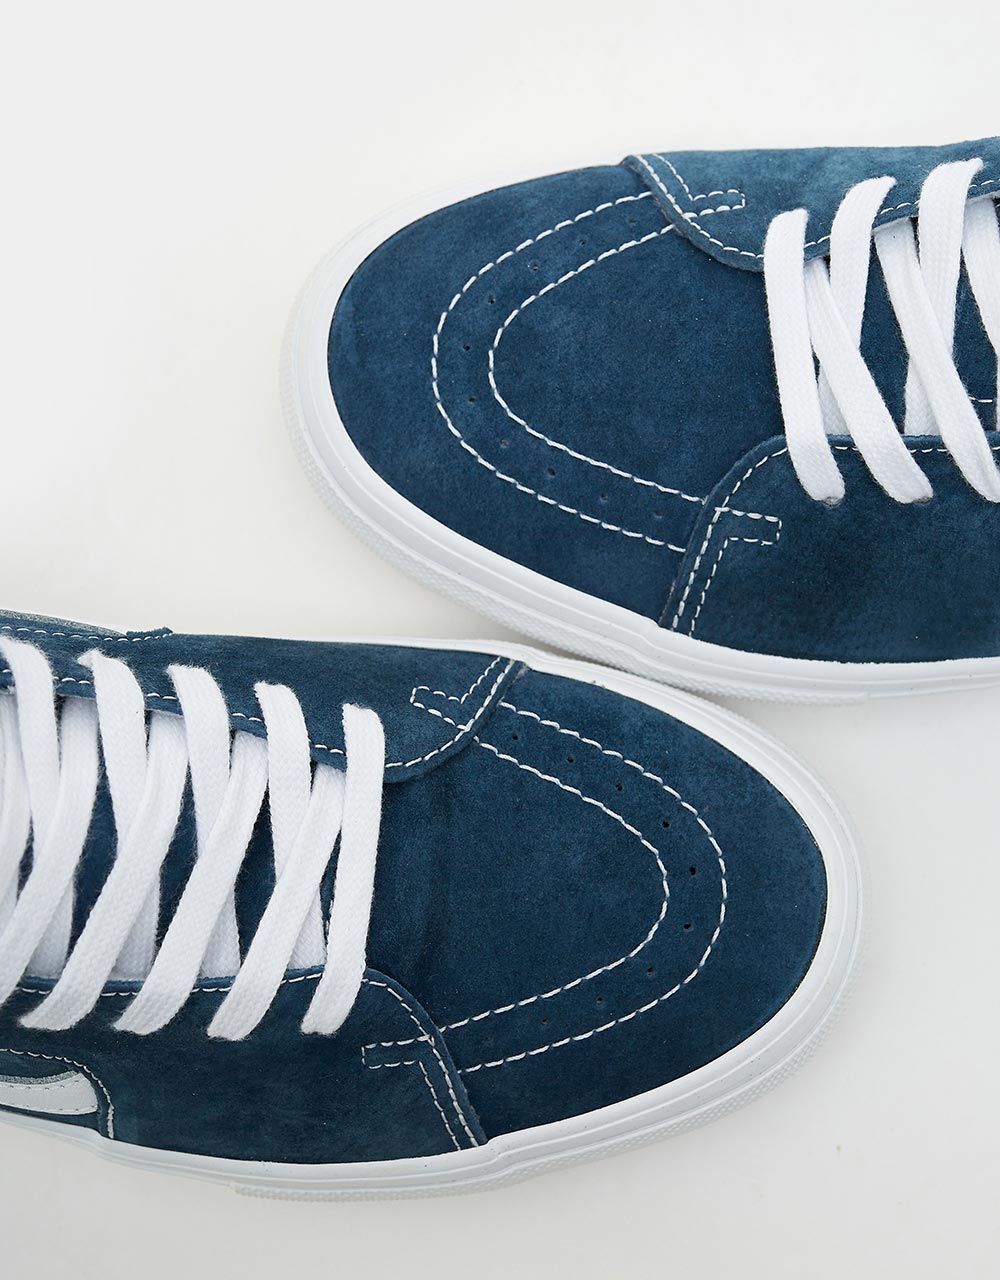 Vans Skate Grosso Mid UK EXCLUSIVE Shoes - Blue/White